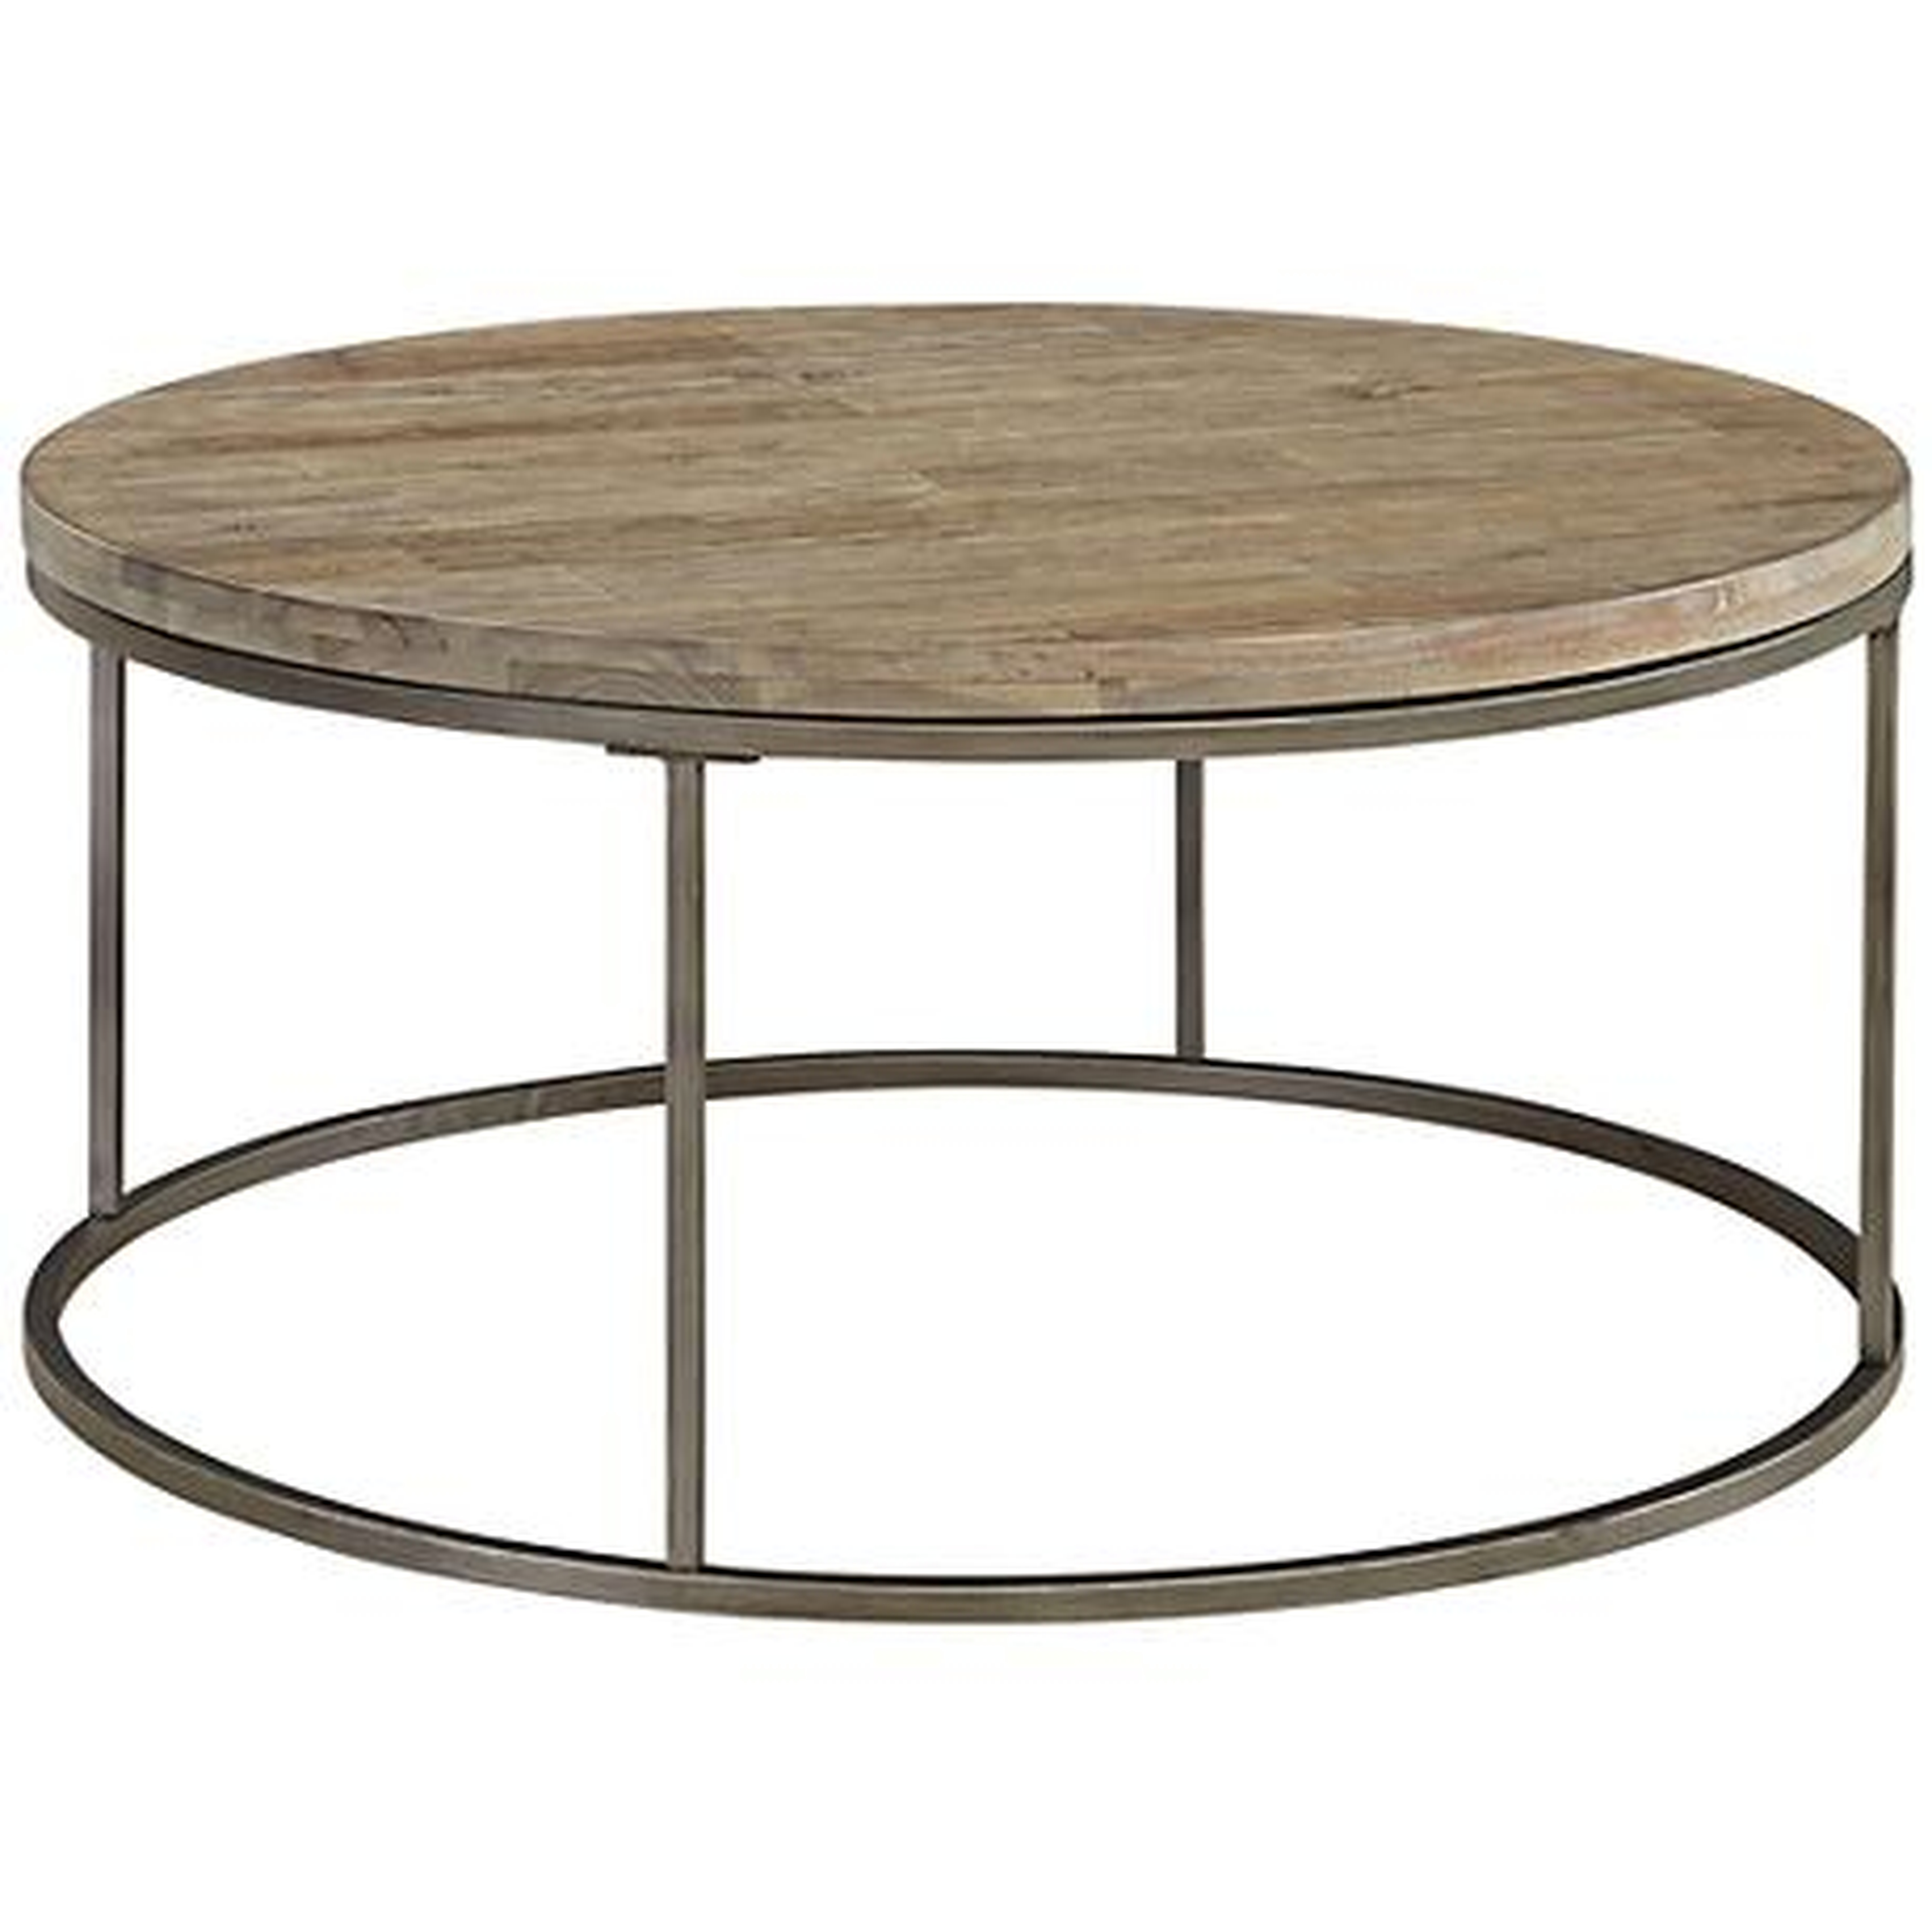 Alana Steel and Acacia Wood Top Round Coffee Table - Lamps Plus